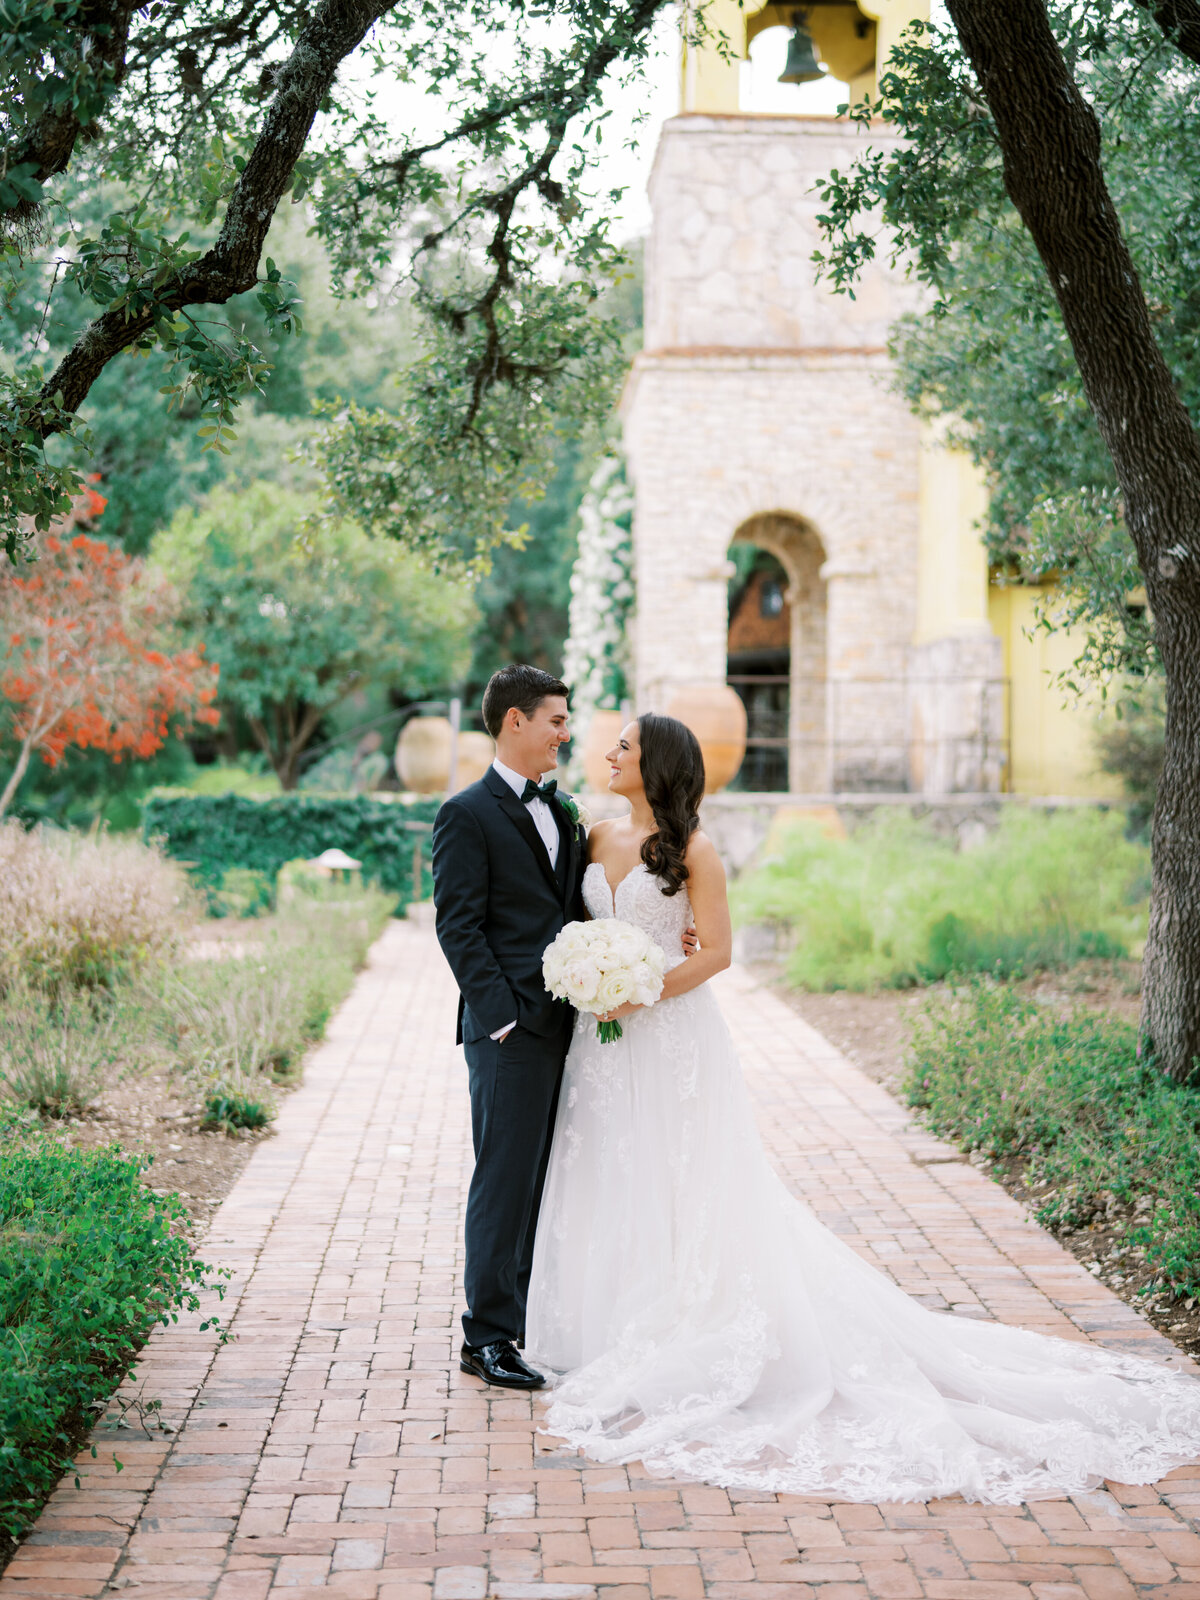 A married couple poses together next to Ian's Chapel at Camp Lucy in Dripping Springs